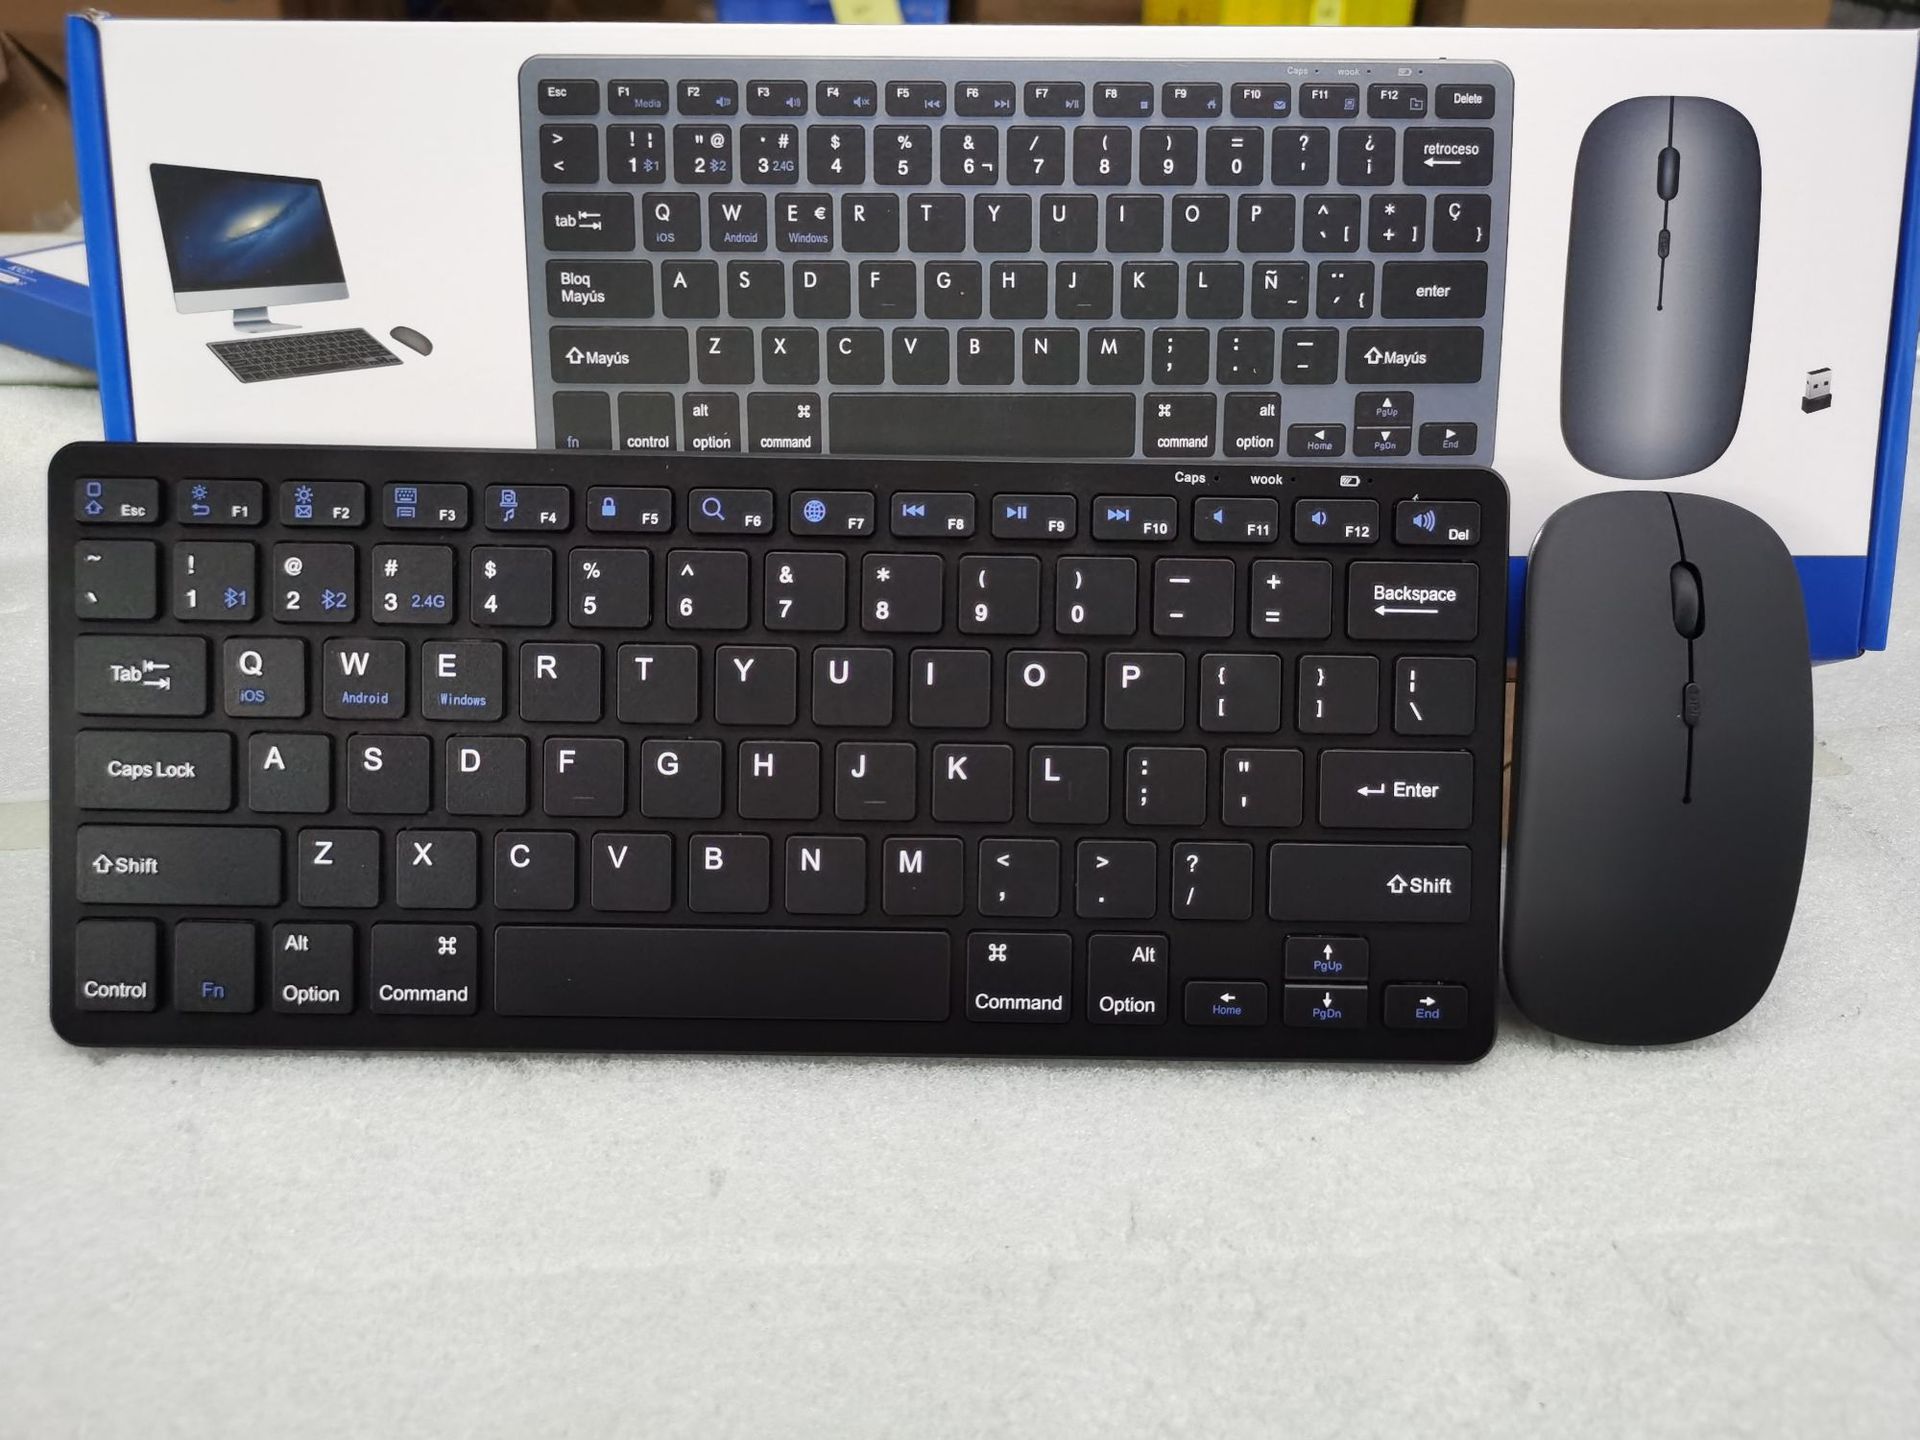 Yixin 922 Charging 2.4G + Bluetooth Three-Model Keyboard and Mouse Set Desktop Computer Laptop IP Phablet